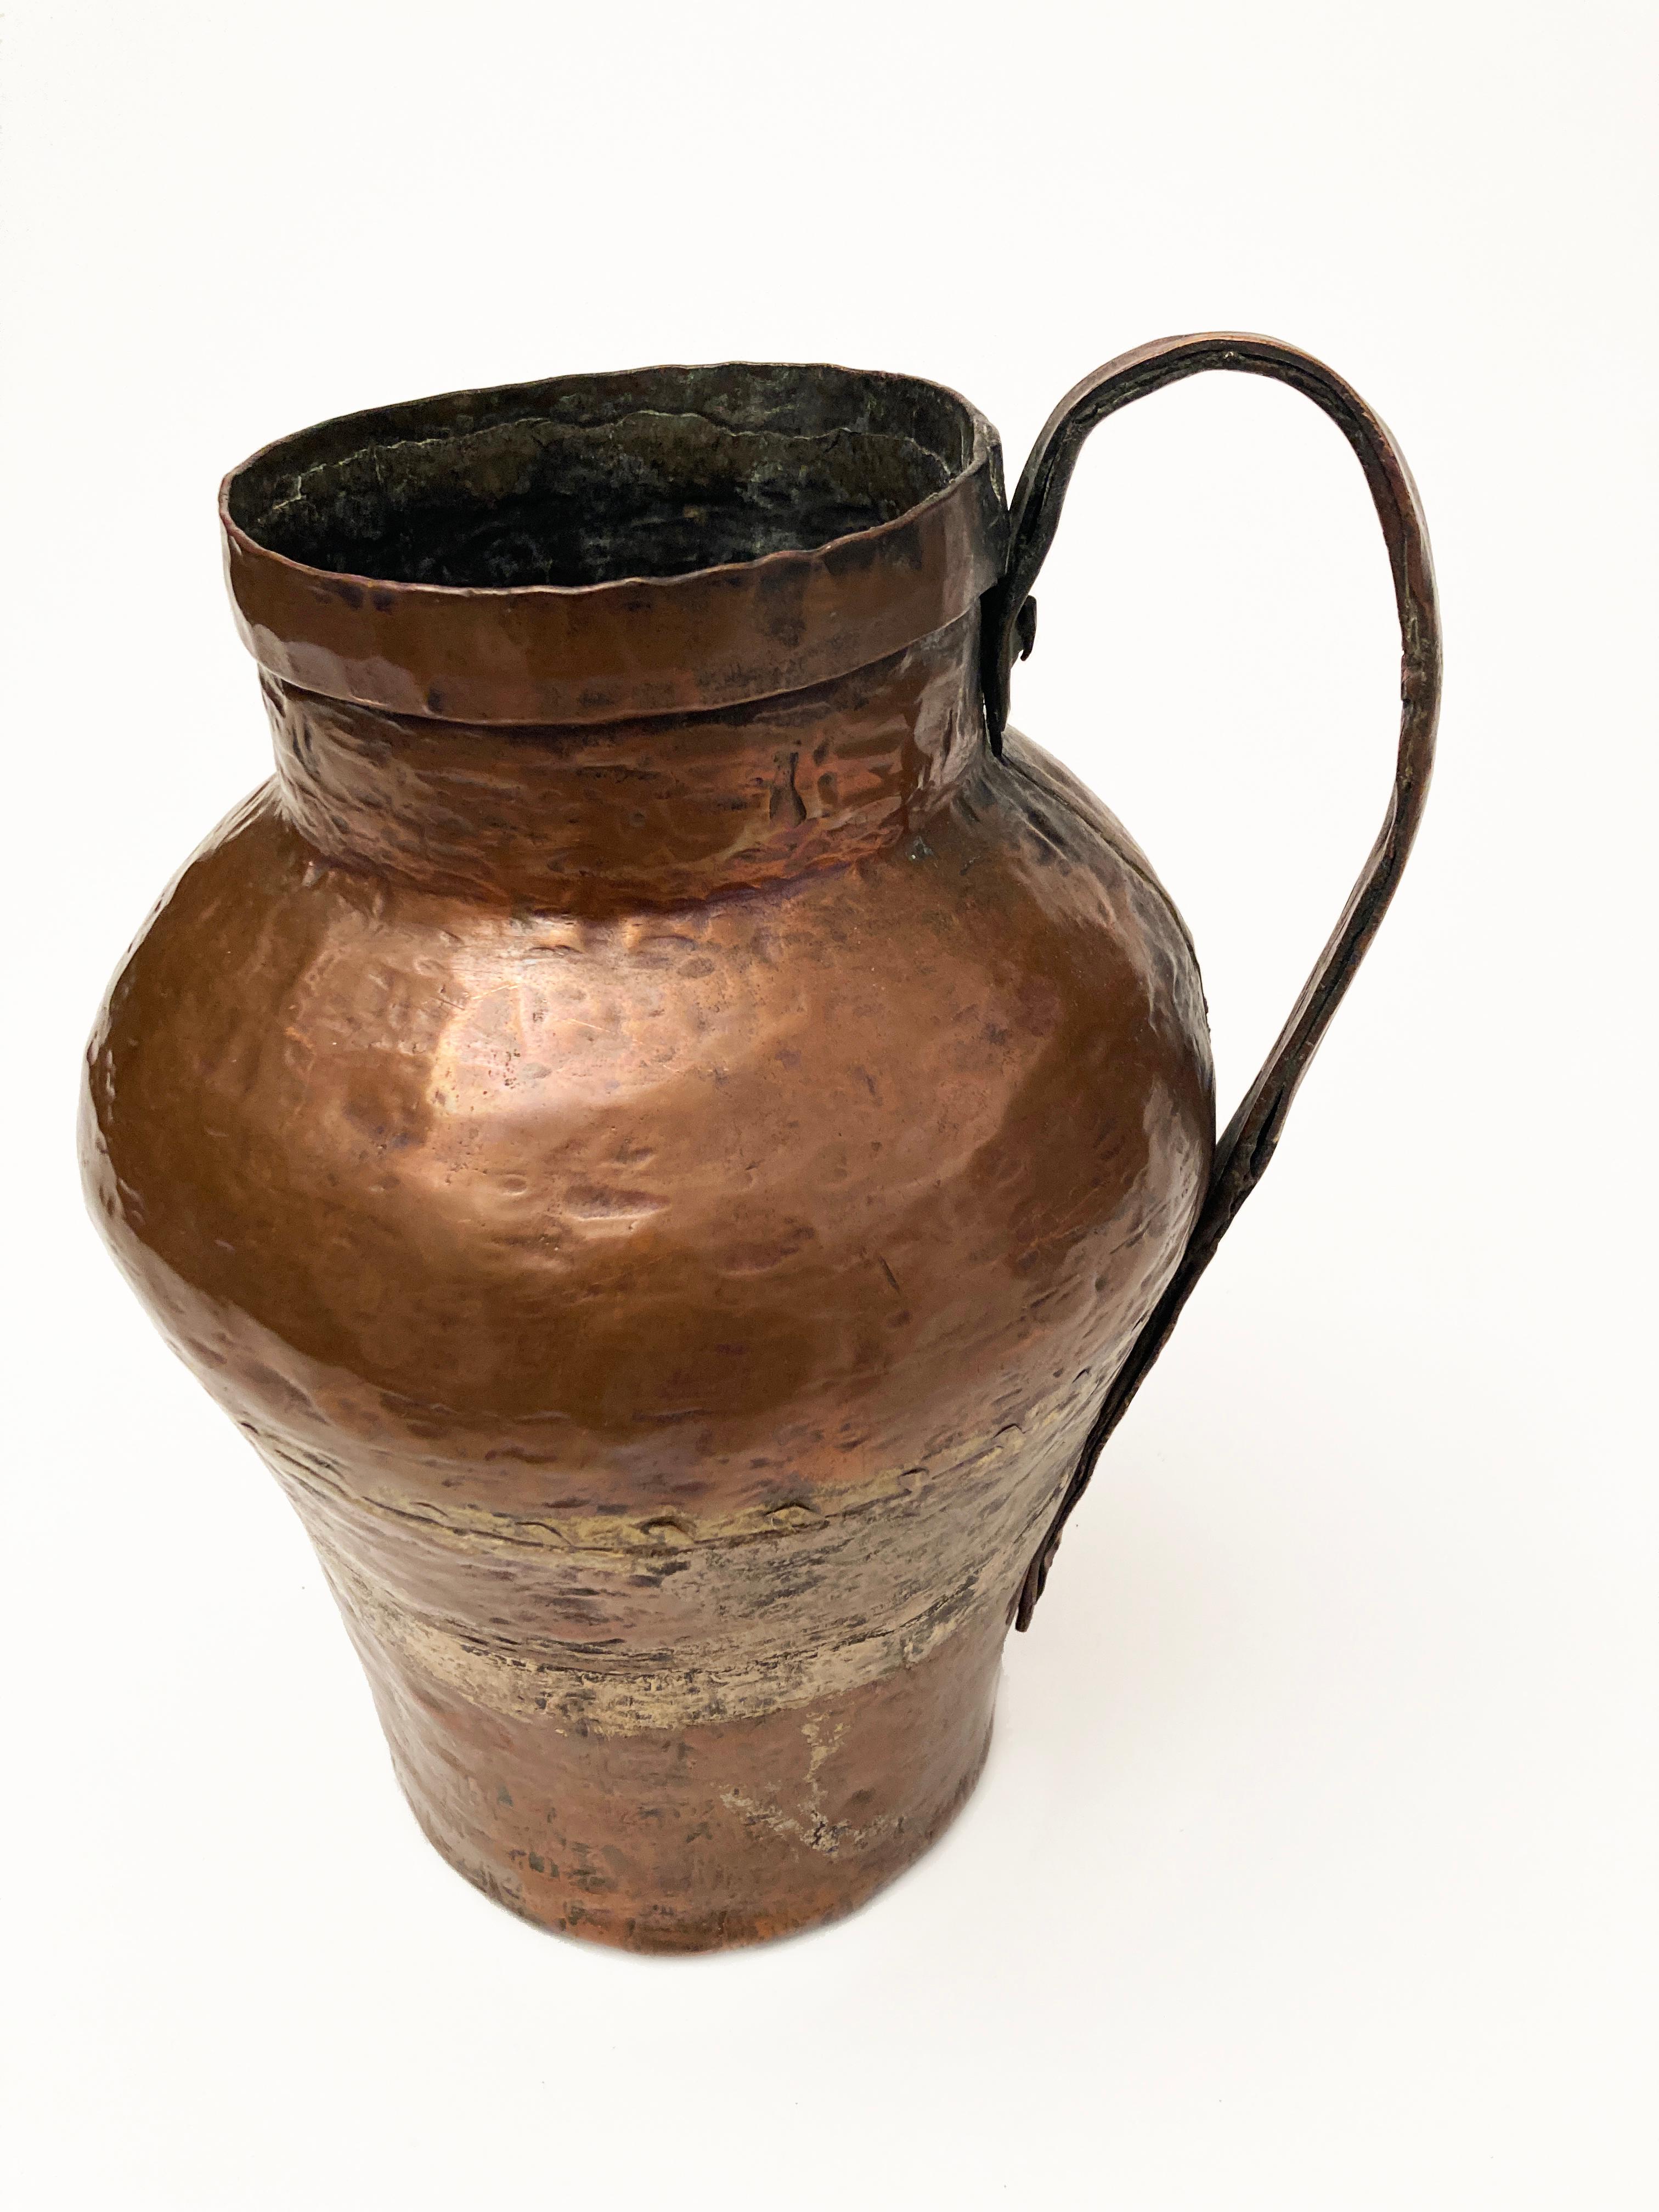 Copper vessels of this nature were once primitively made in Europe and Middle Eastern areas of the world. This piece is a stunning example of the stout, but primitive craftsmanship that went into creating it. This jug, most likely made for the